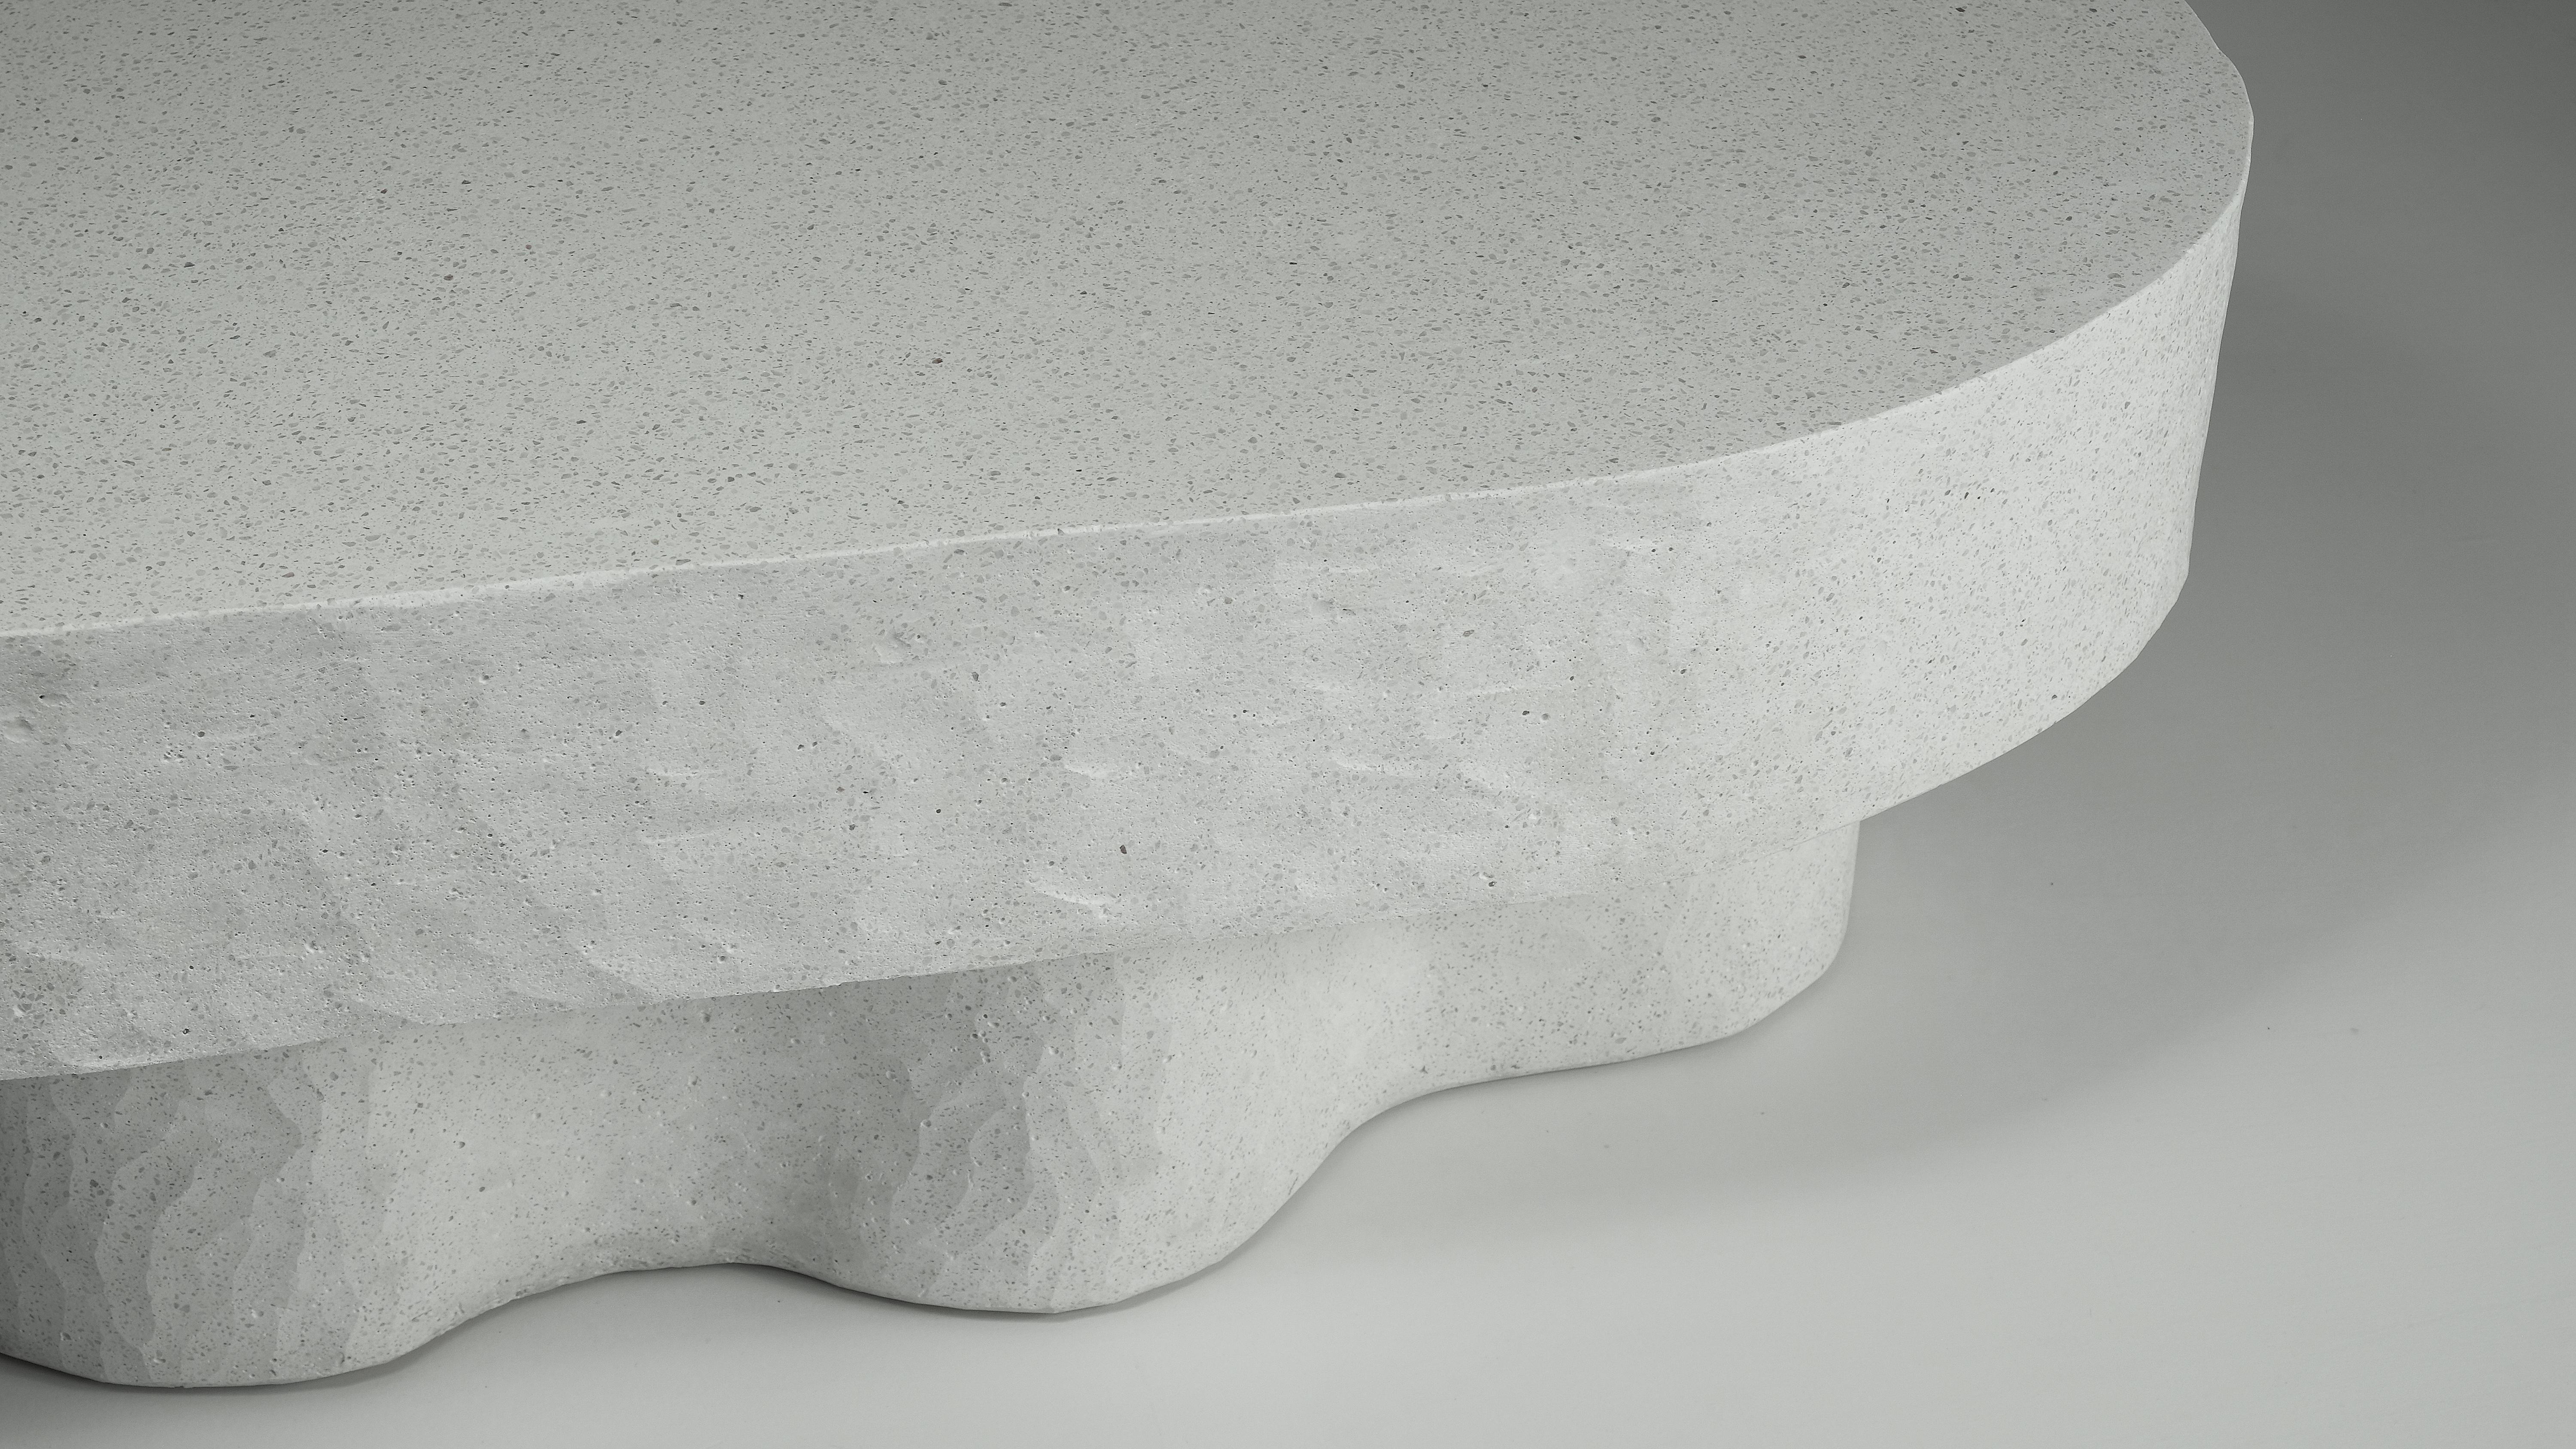 Organic Modern Hand Sculpted Bench / Table 'MEDUSA' in white cast stone by Alentes Atelier For Sale